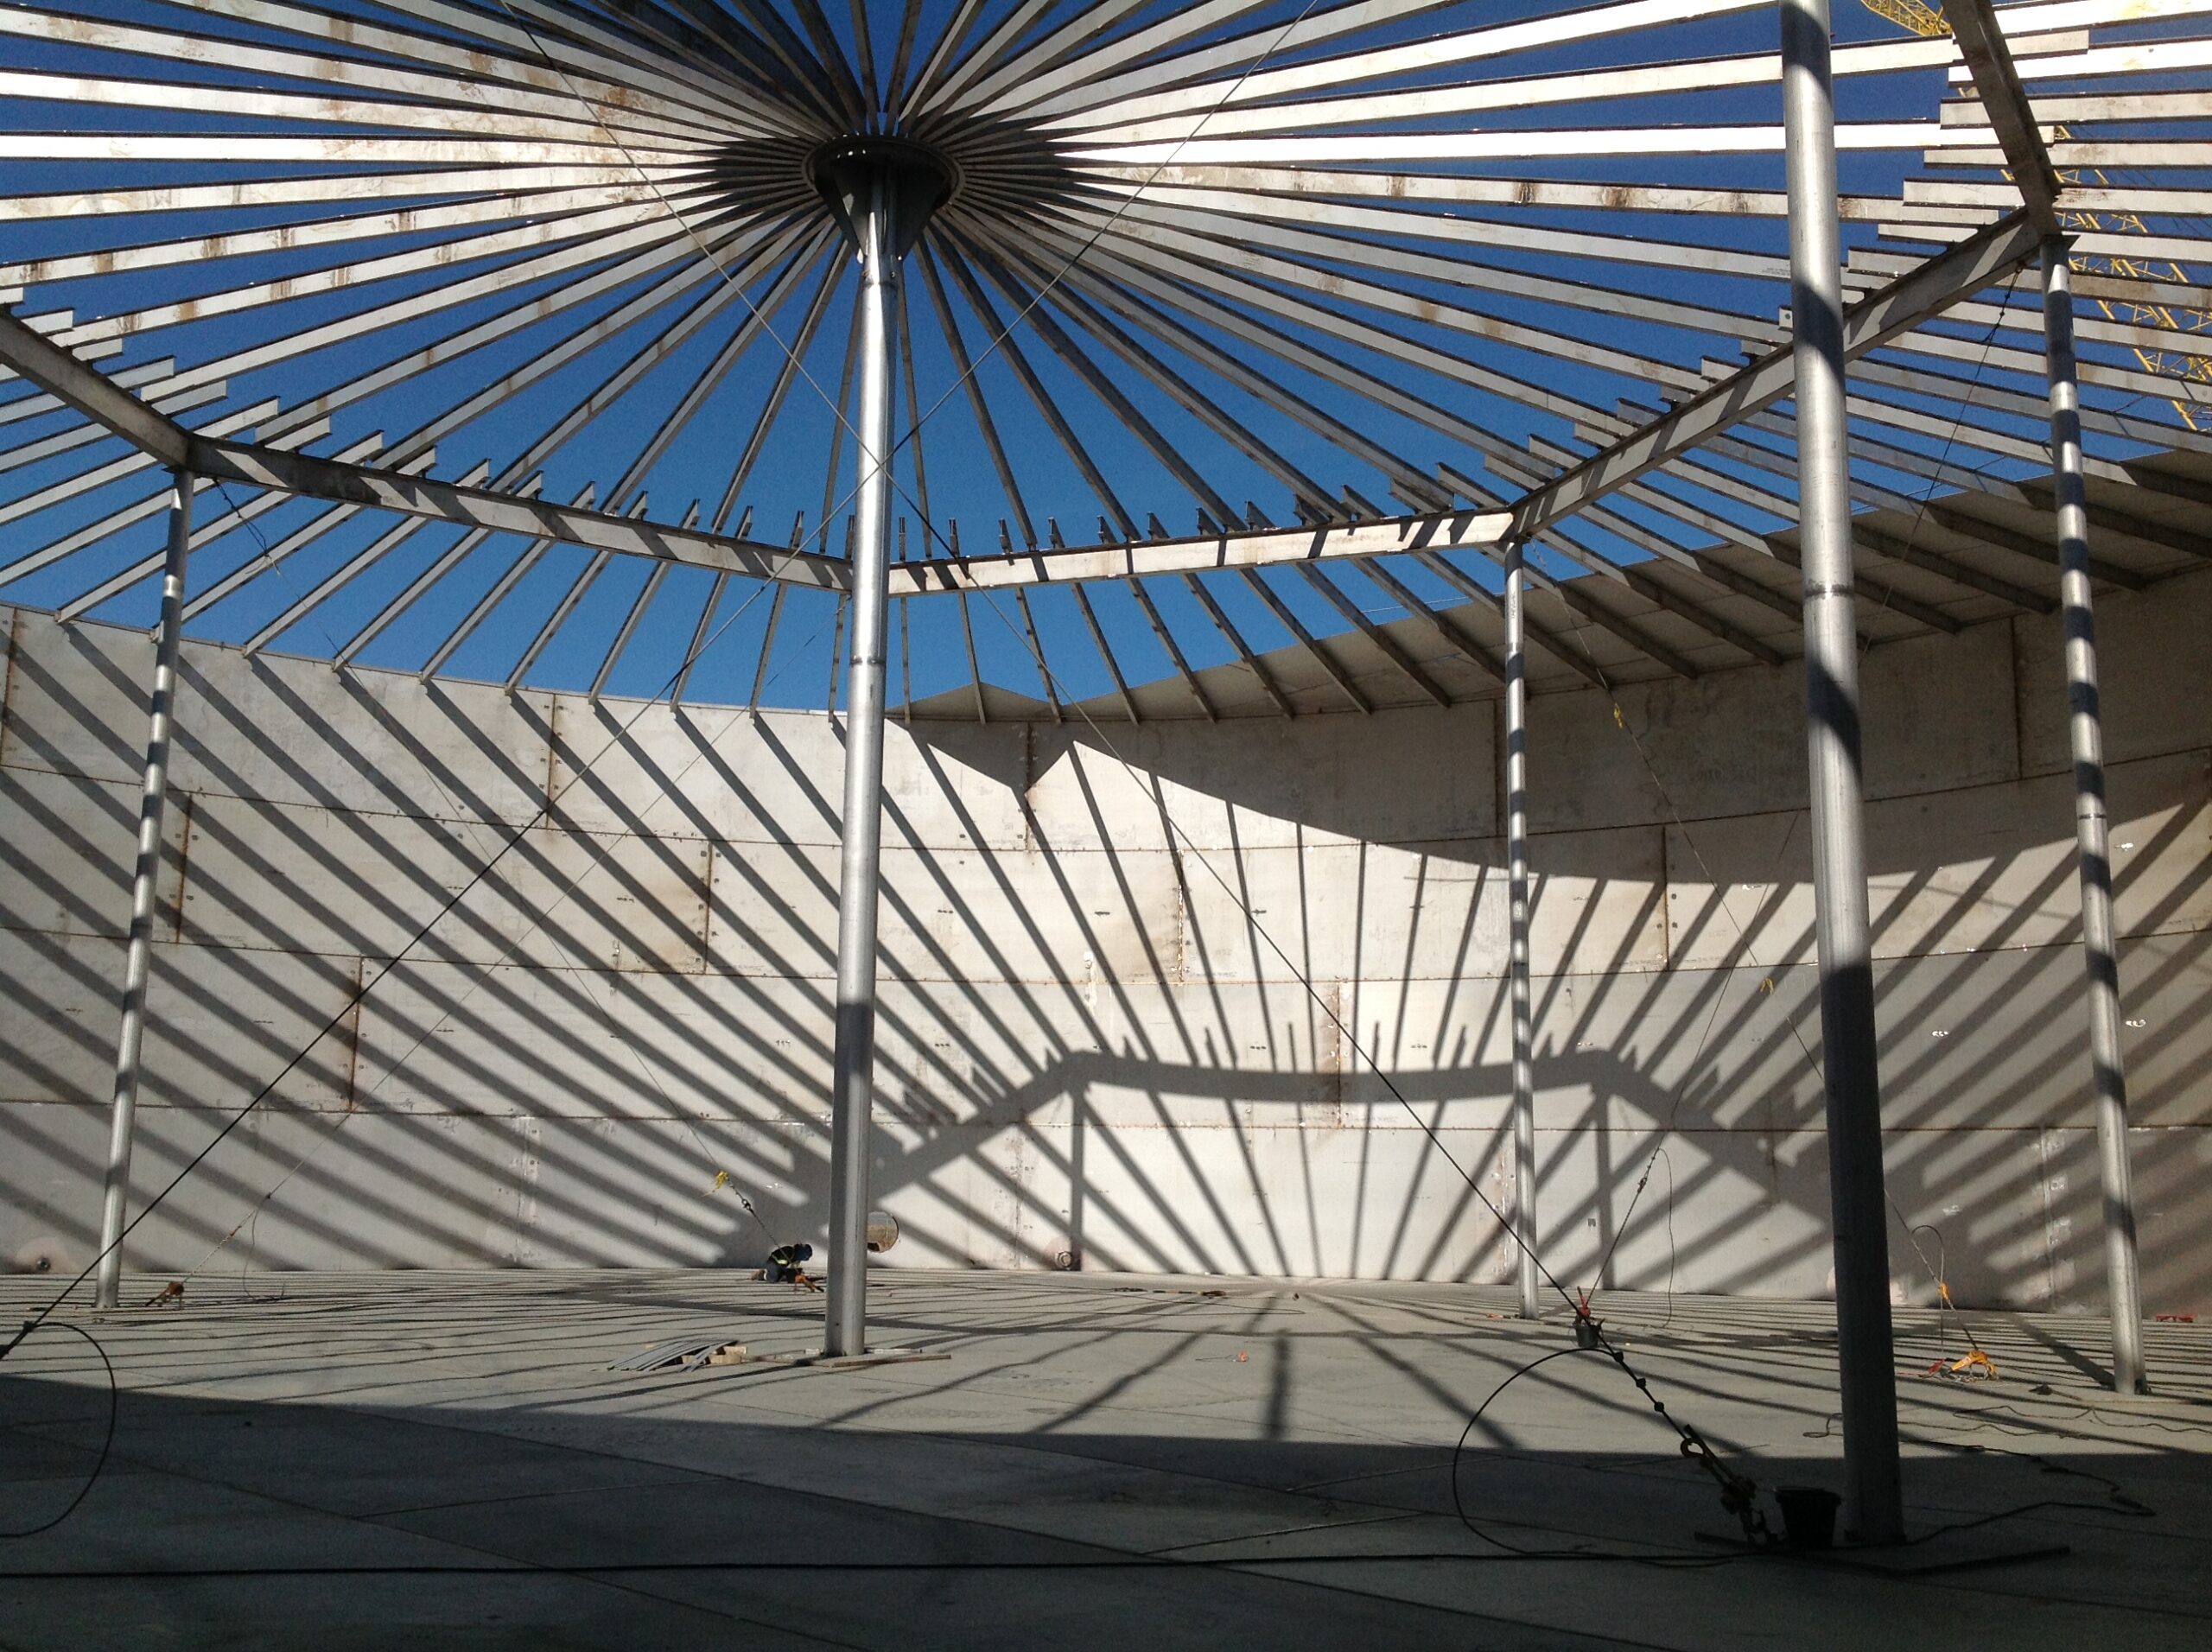 A metal structure with a shadow on the ground